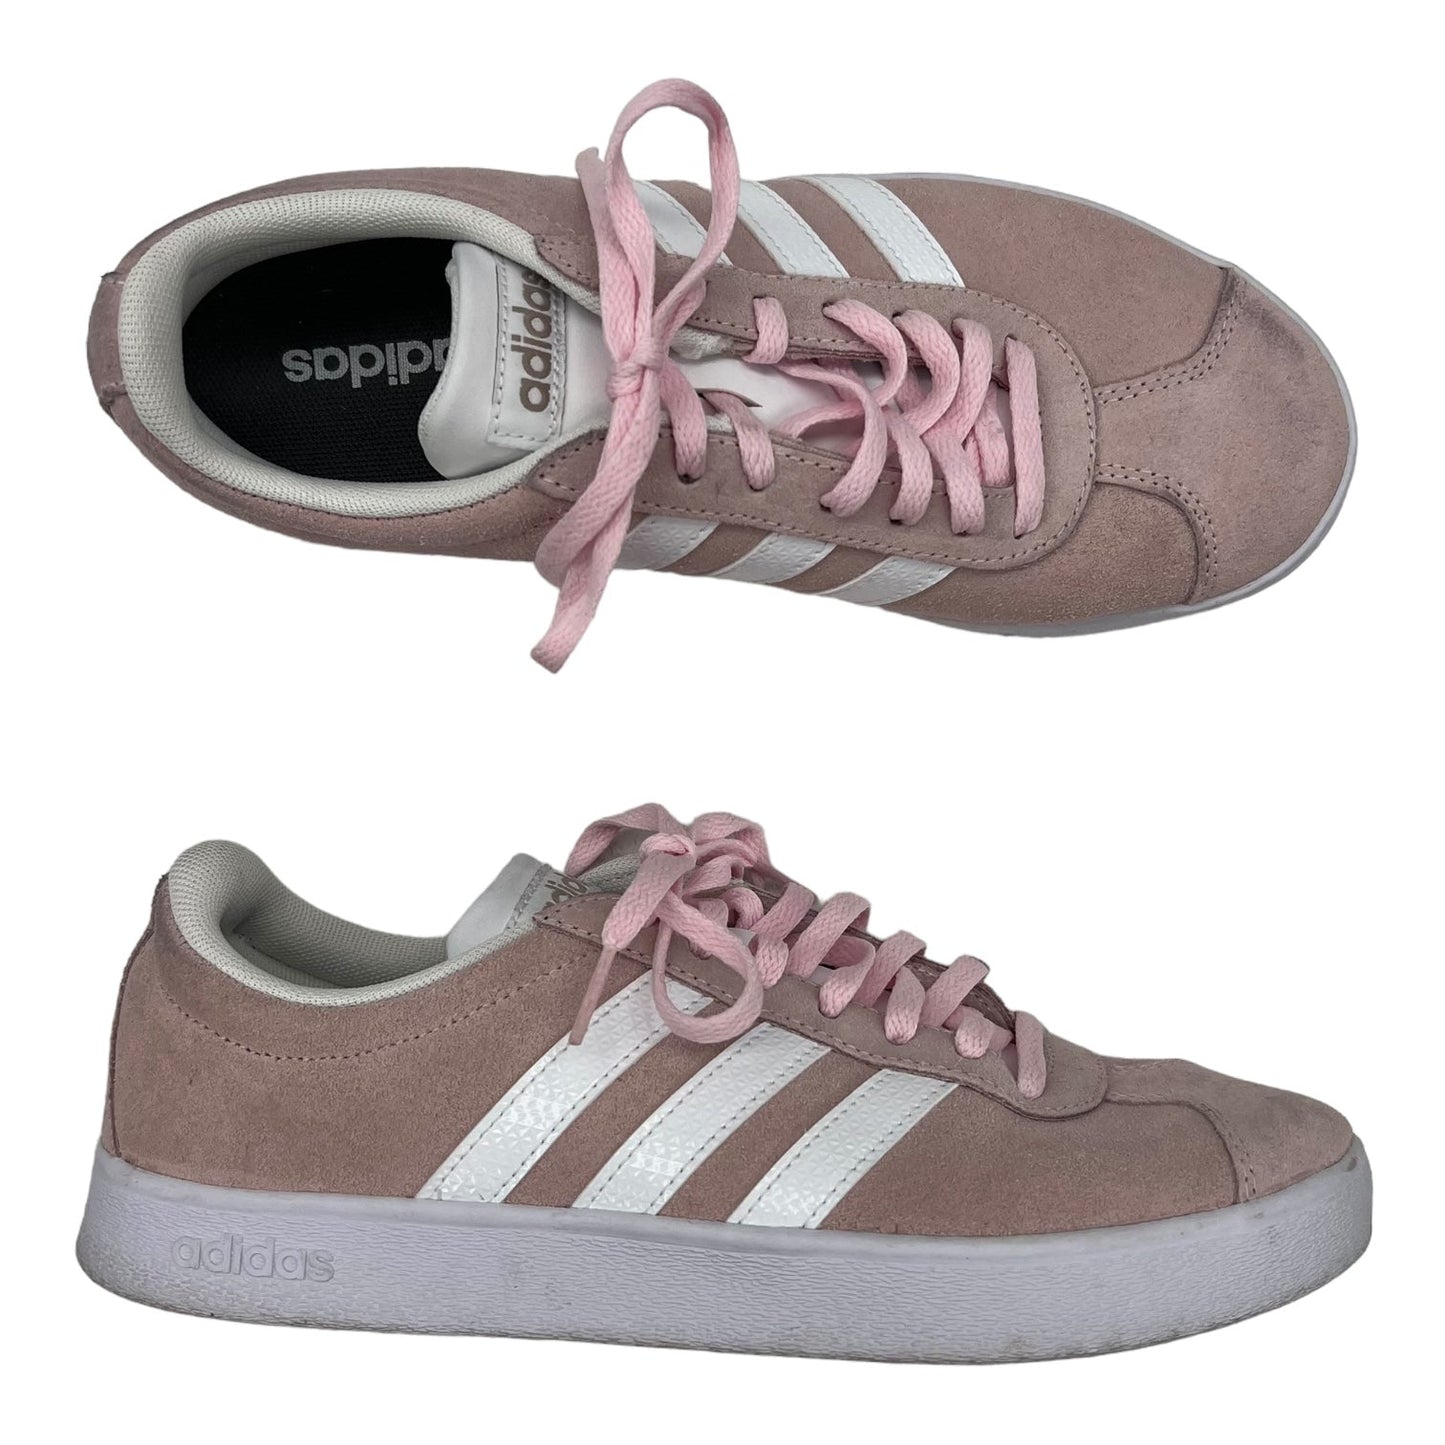 PINK SHOES SNEAKERS by ADIDAS Size:7